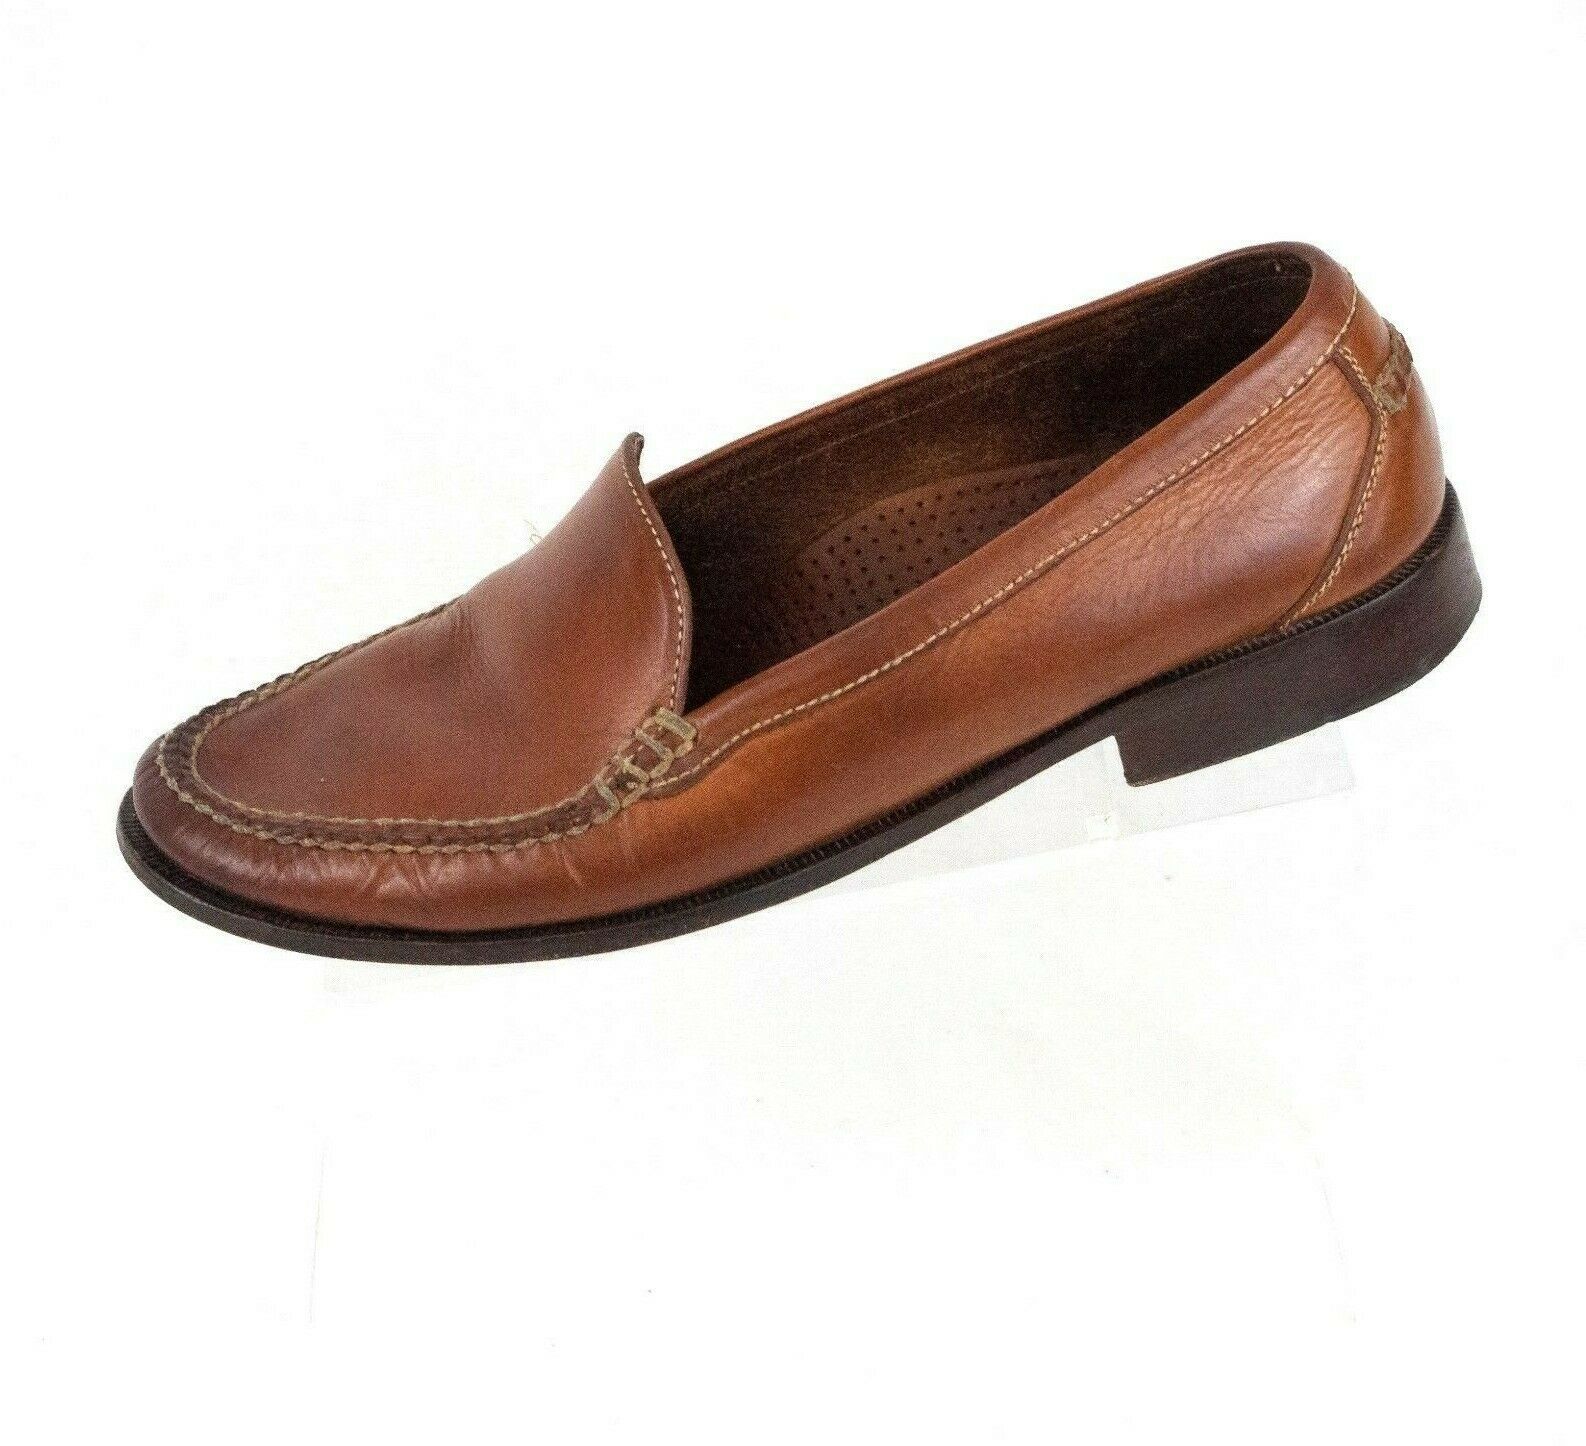 Cole Haan Loafers 9.5 D Hand Sewn Brazil Memory Flex Comfort Sole 1503 Shoes - $44.30